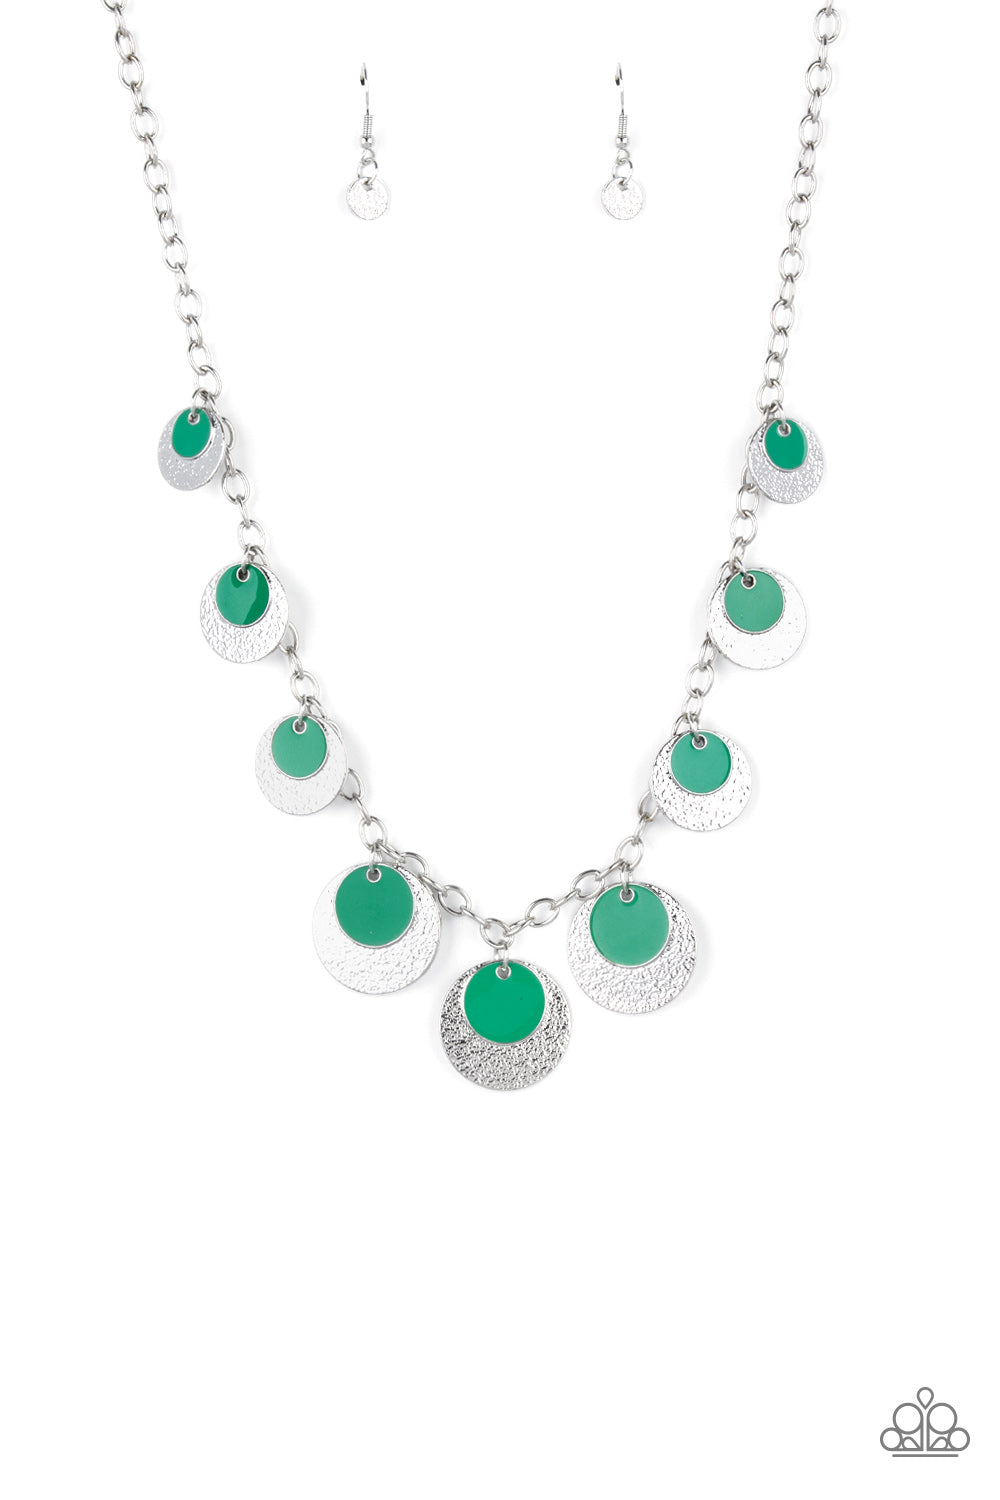 Paparazzi - The Cosmos Are Calling - Green Necklace